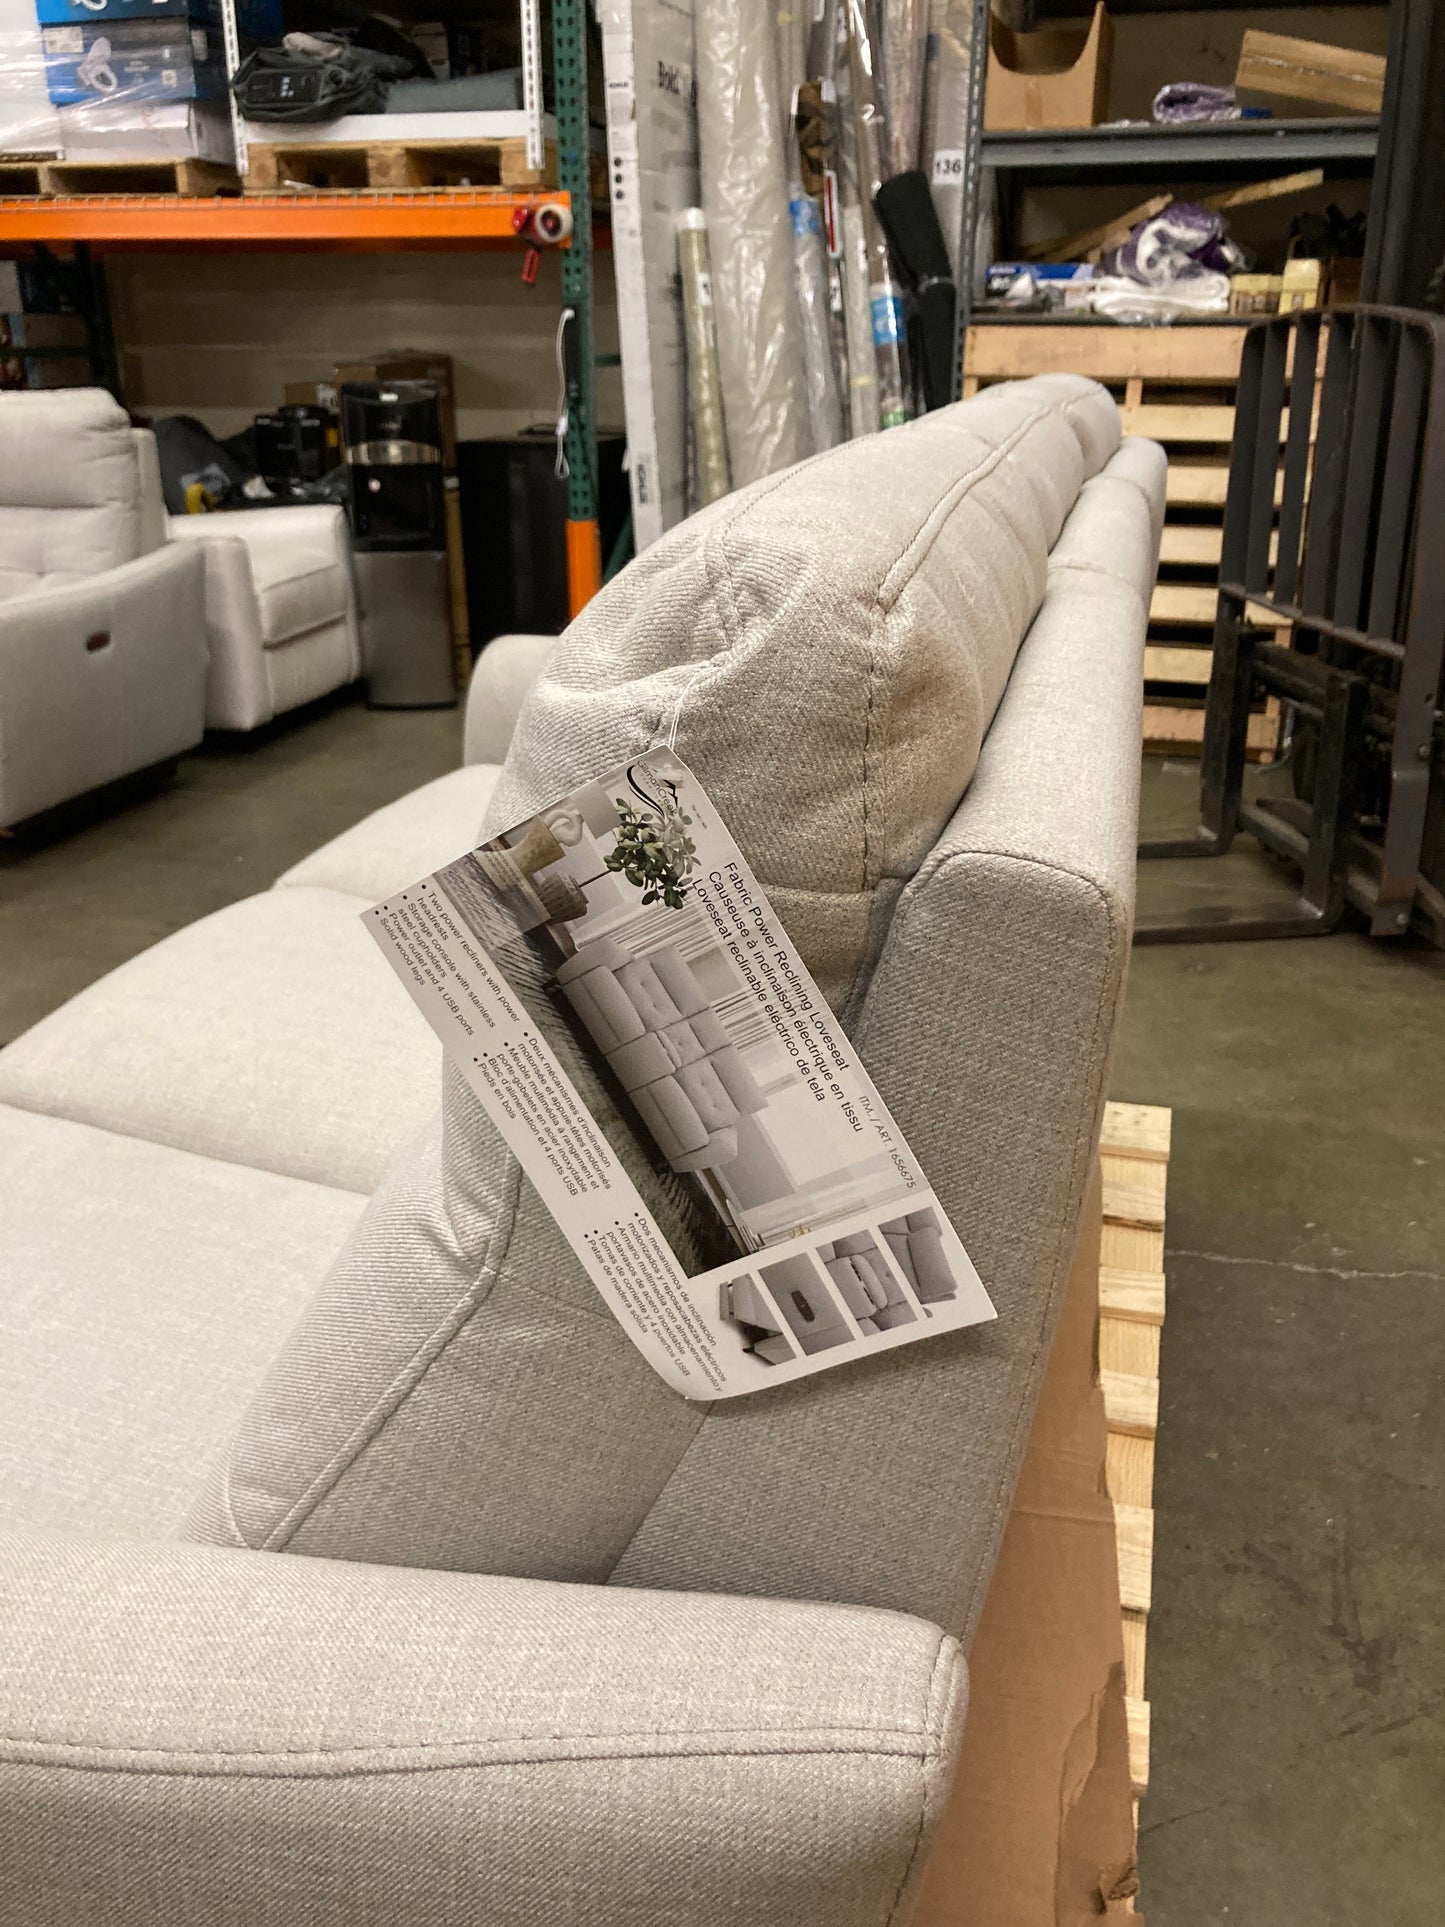 Like NEW - Costco - Alpendale Fabric Power Reclining Sofa with Power Headrests - Retail $1199